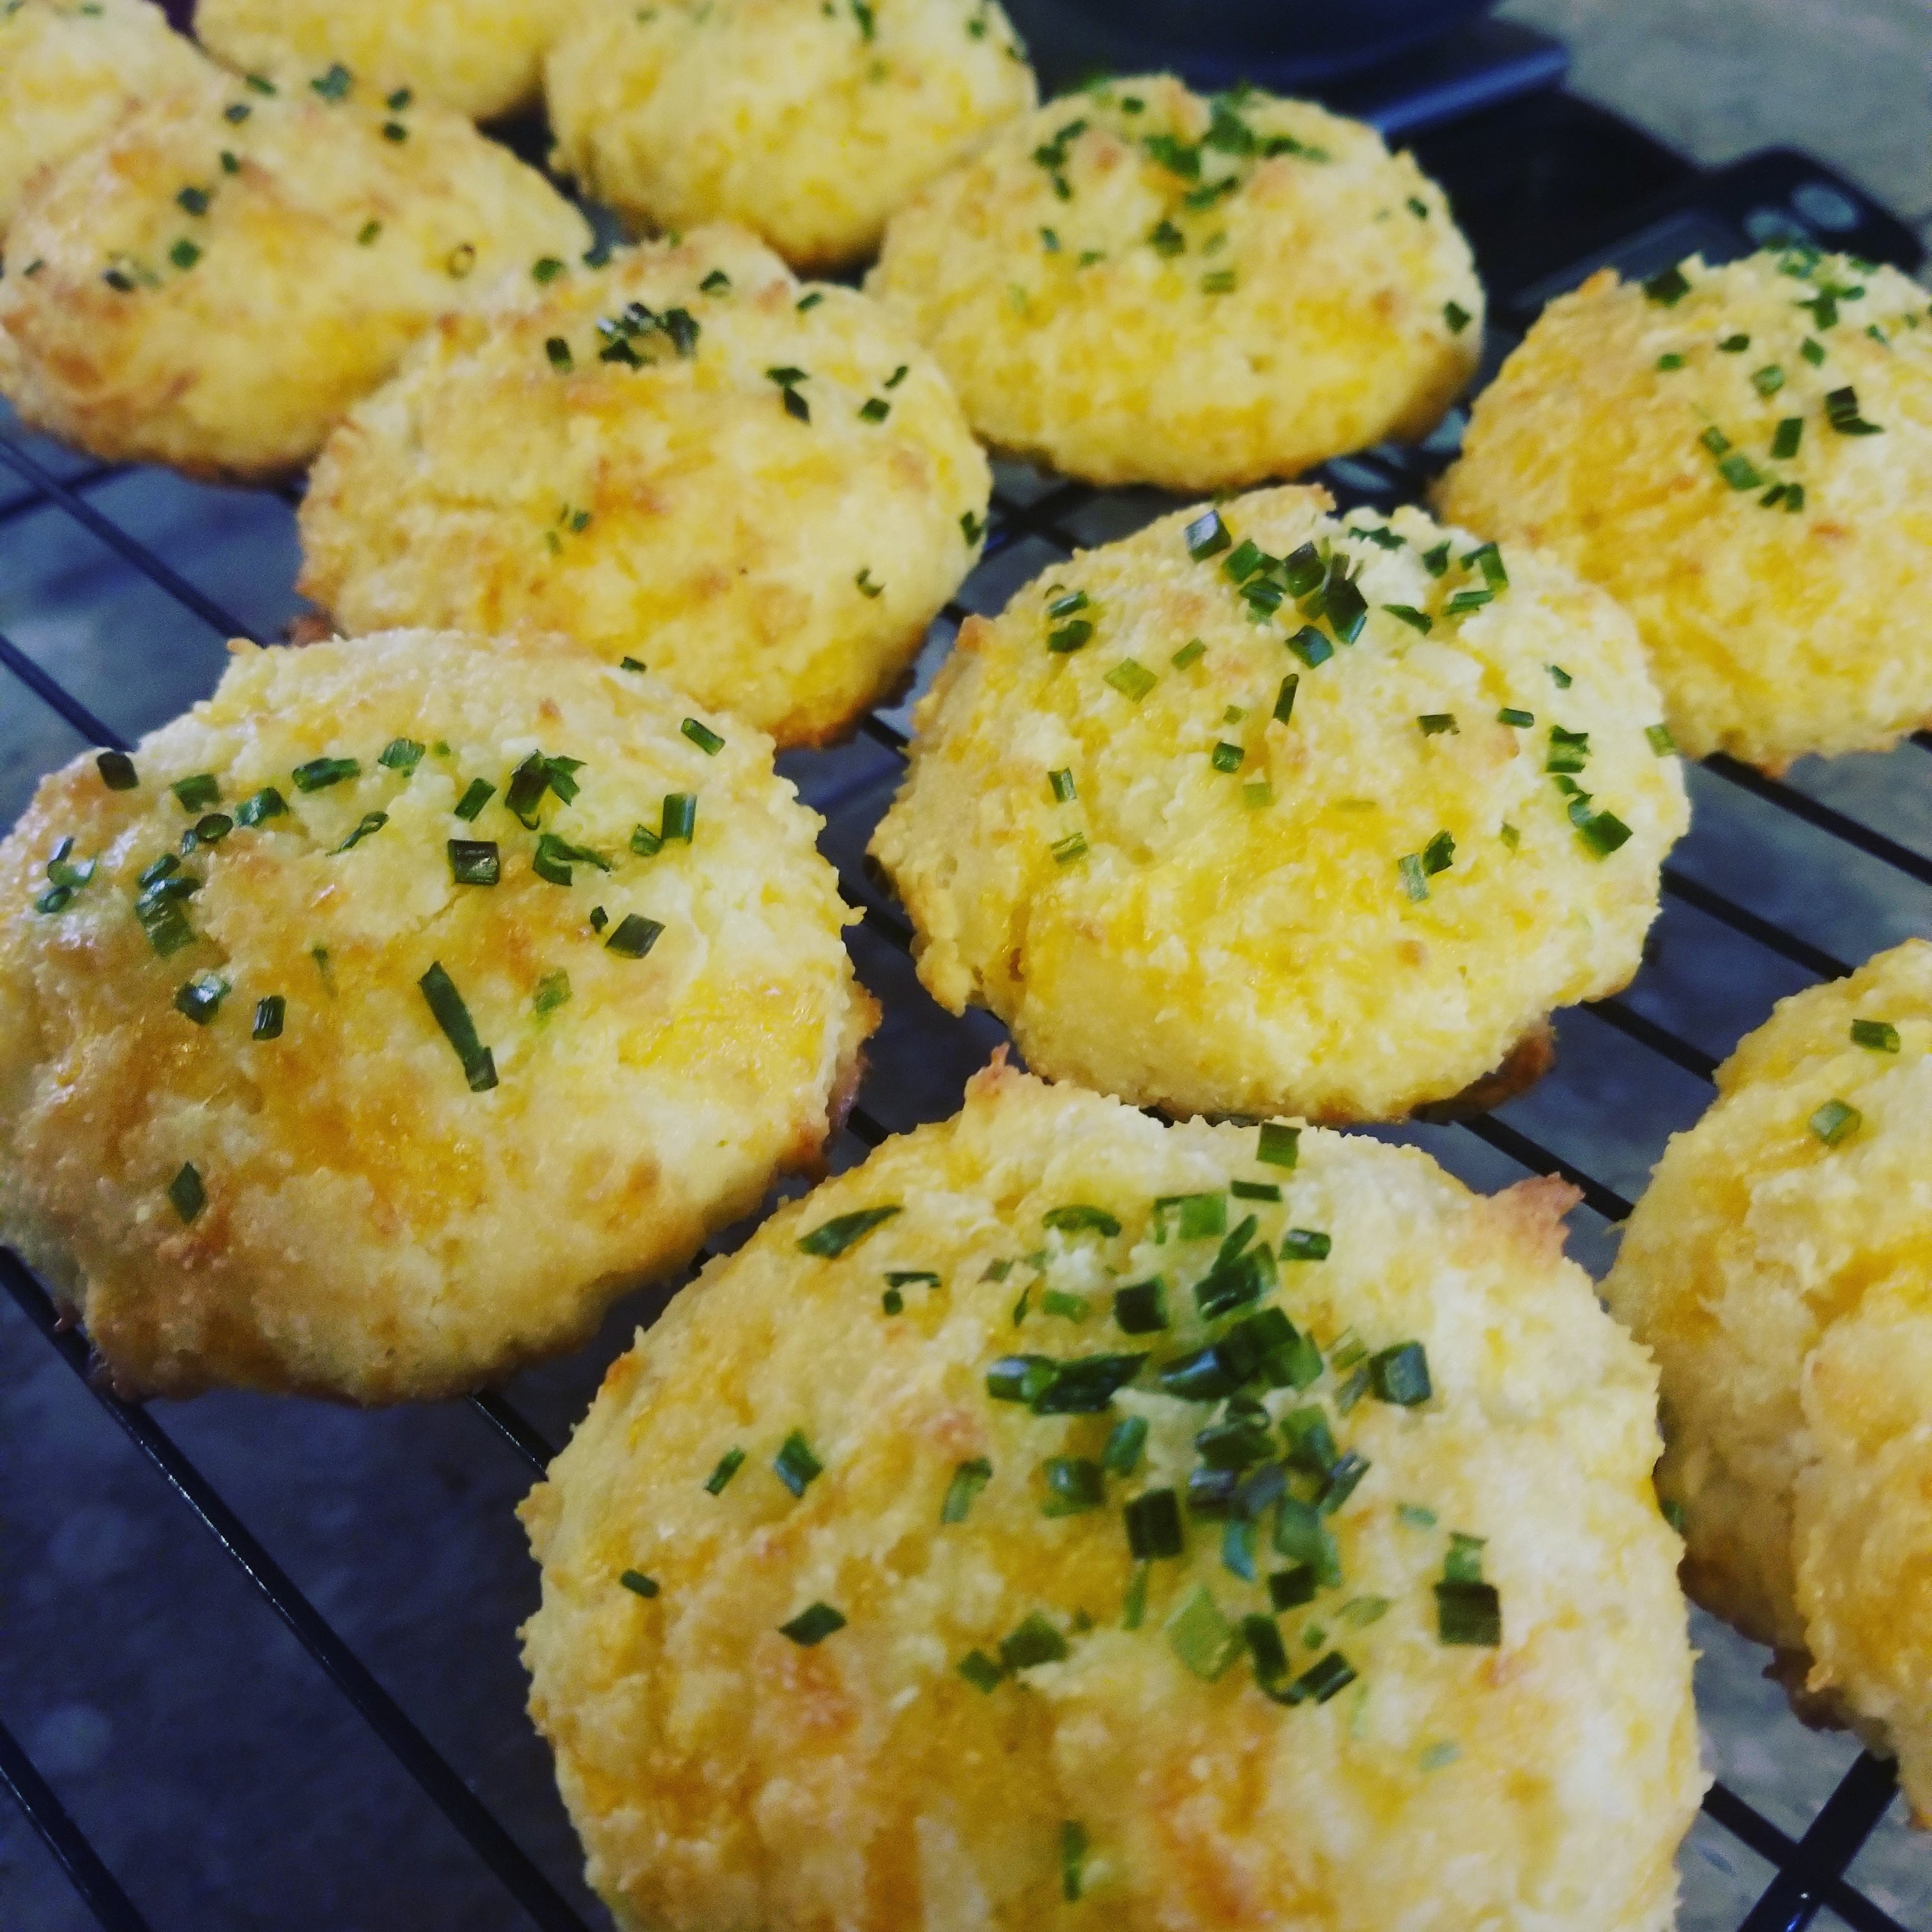 Cheesy Stan Biscuit (Calories 393, Net Carbs 4)